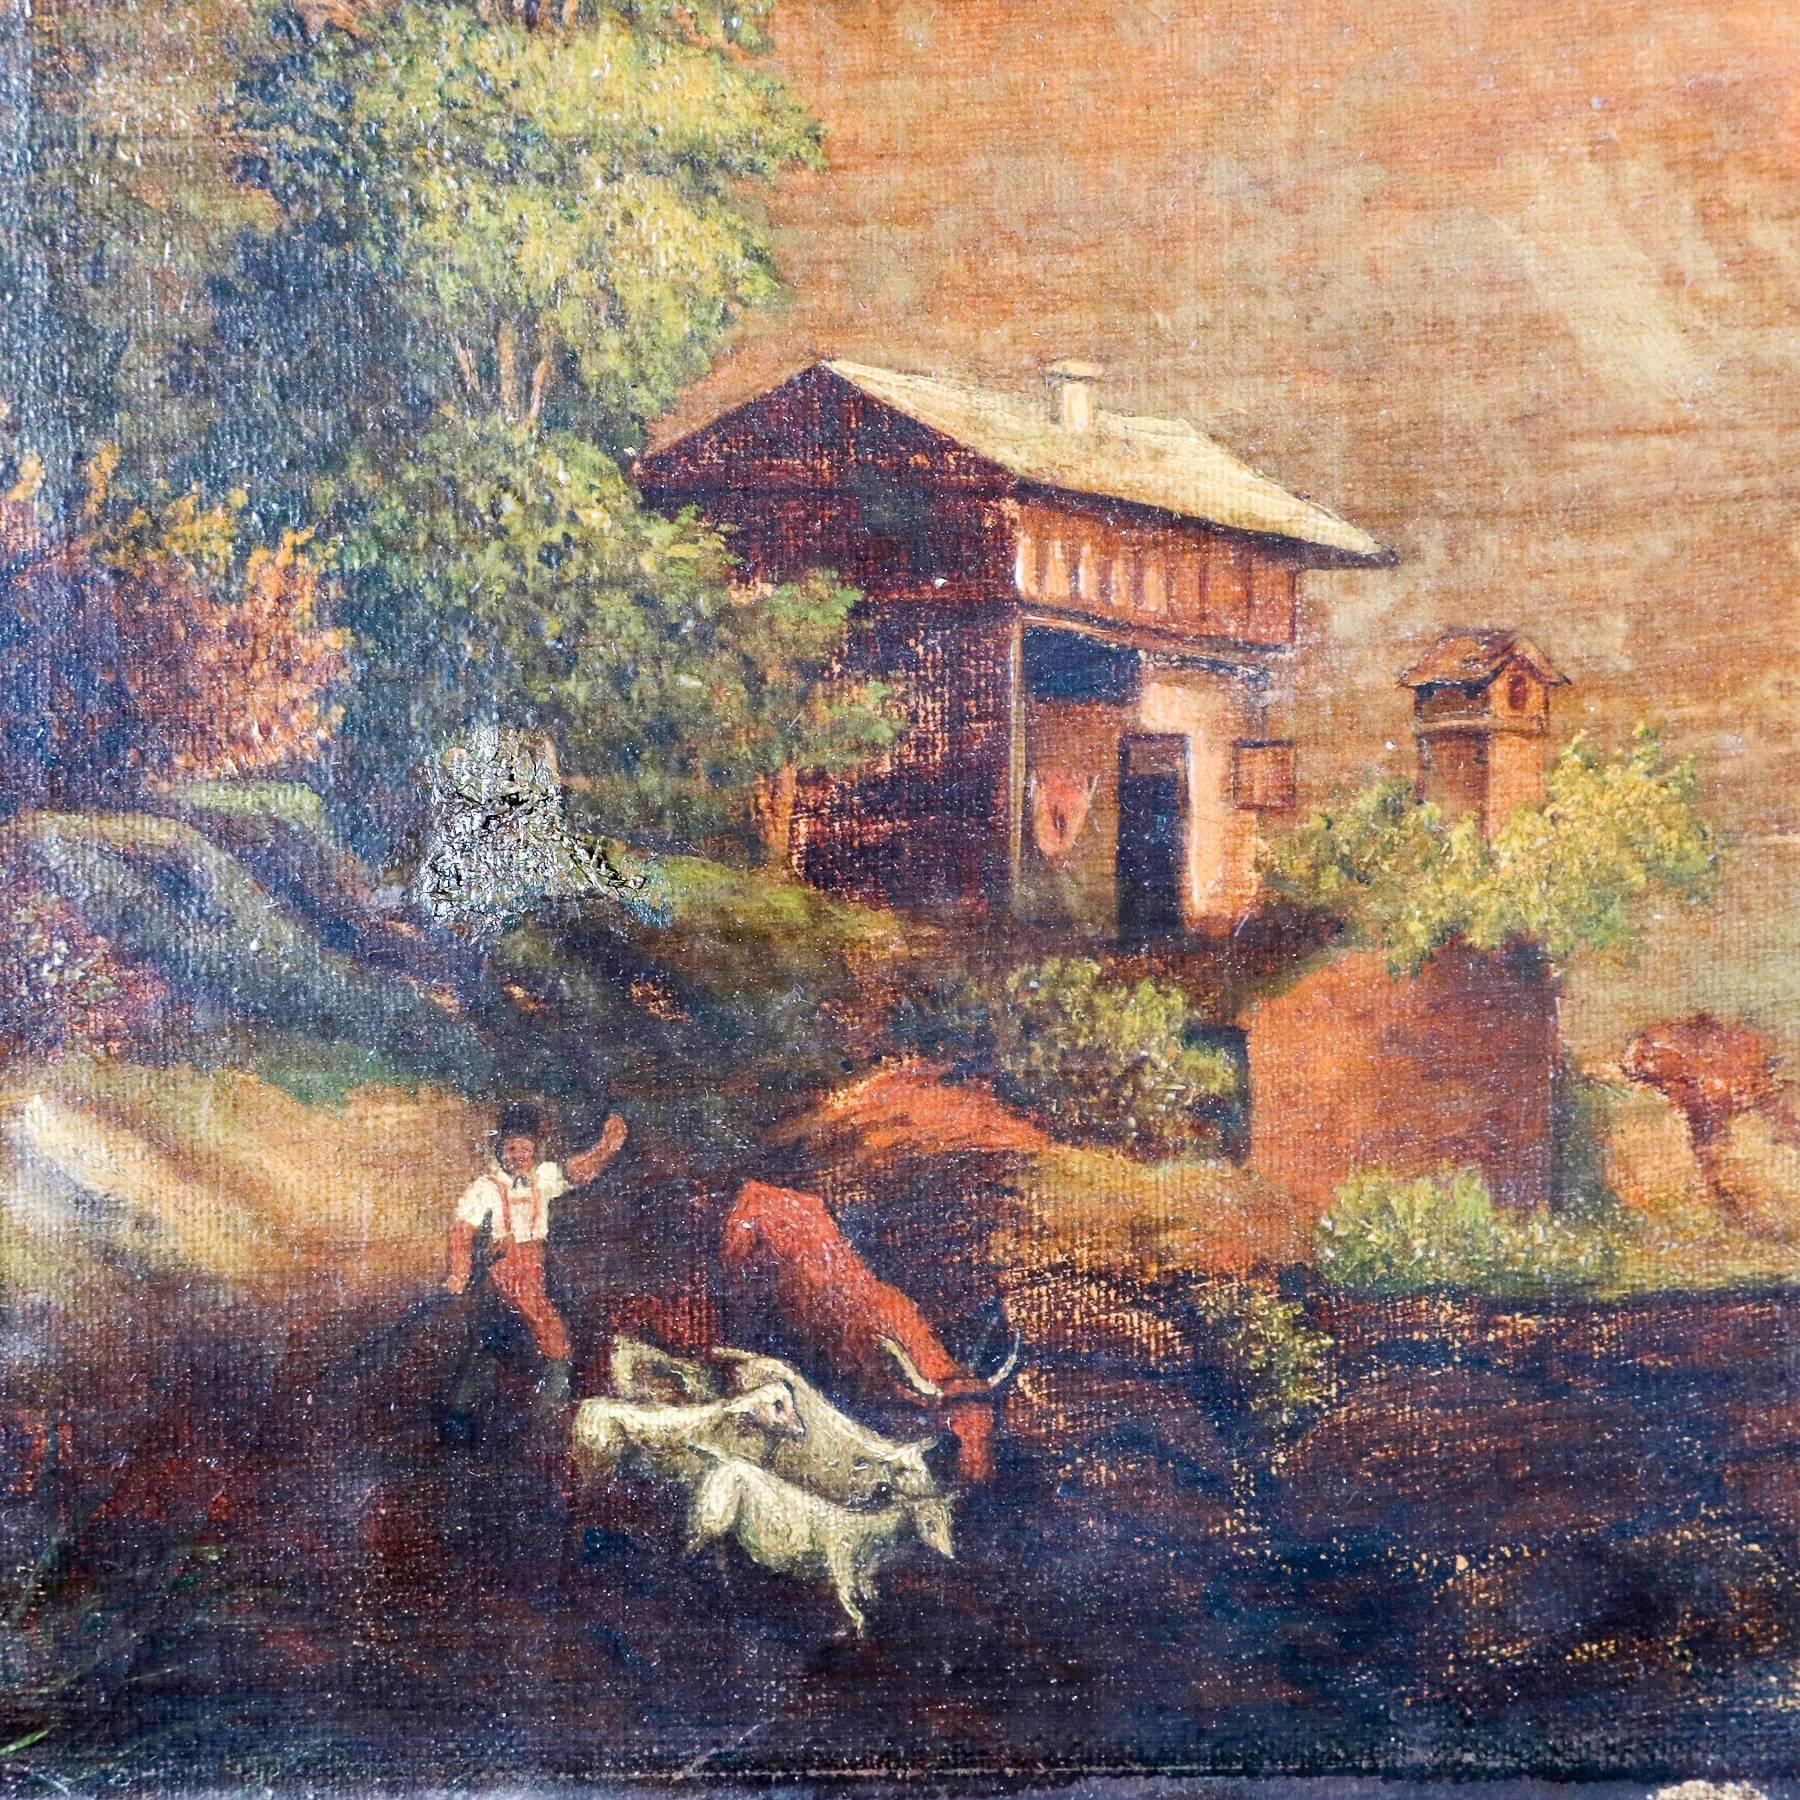 Hand-Painted Antique Oil on Canvas Landscape Painting of Mountain Lake House by Effie Andrews